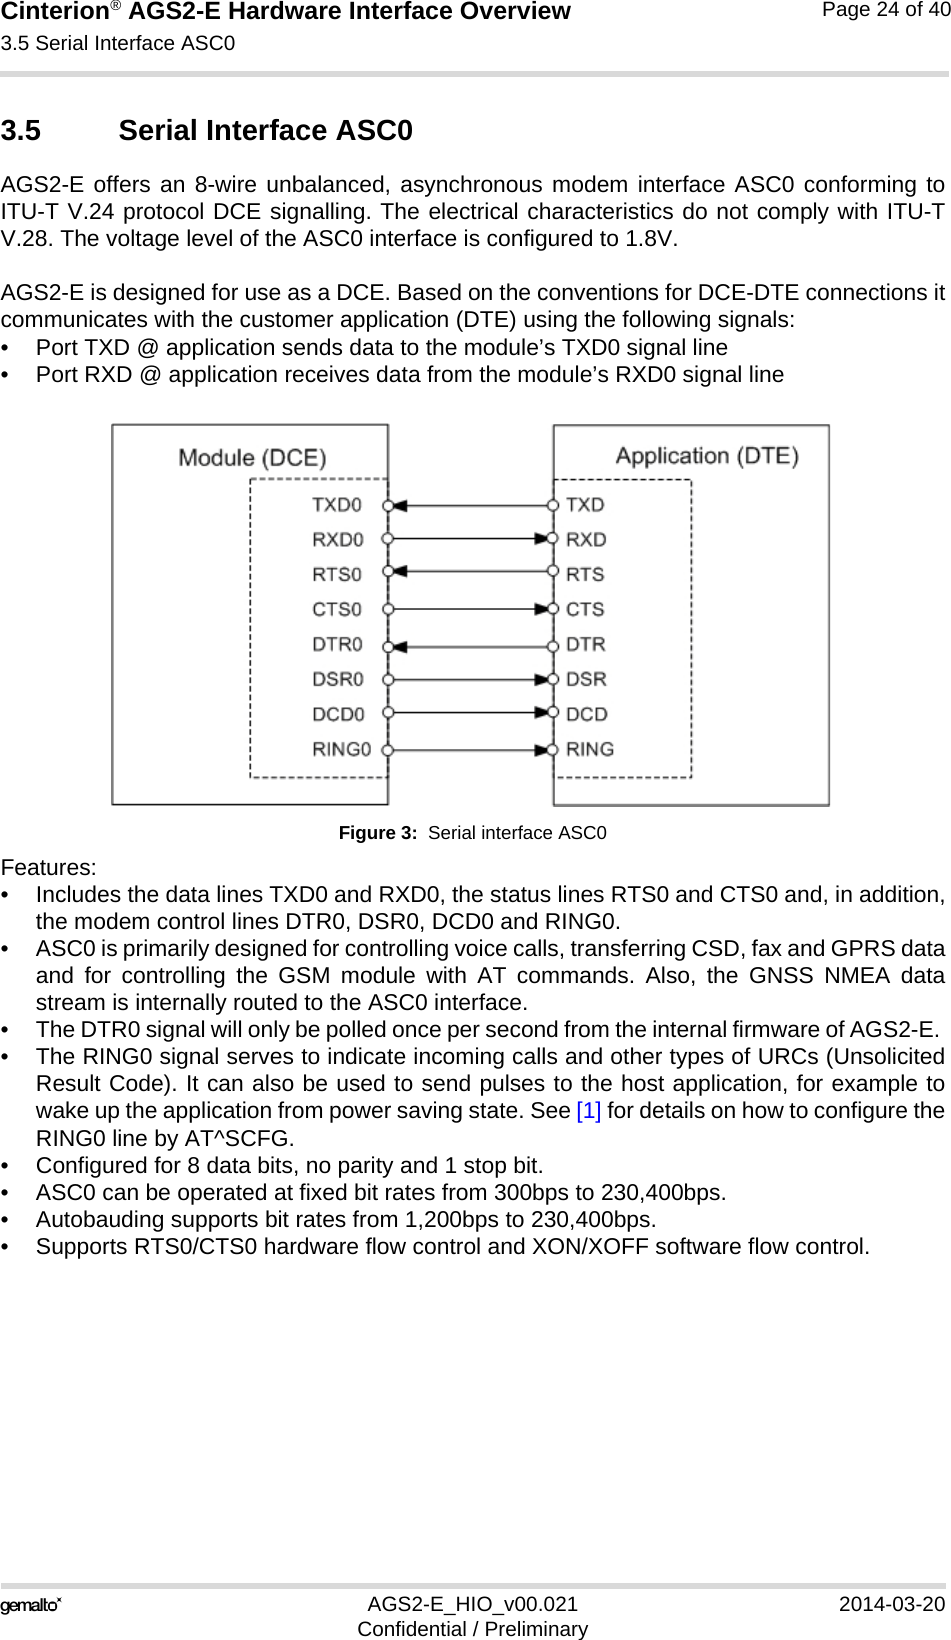 Cinterion® AGS2-E Hardware Interface Overview3.5 Serial Interface ASC027AGS2-E_HIO_v00.021 2014-03-20Confidential / PreliminaryPage 24 of 403.5 Serial Interface ASC0AGS2-E offers an 8-wire unbalanced, asynchronous modem interface ASC0 conforming toITU-T V.24 protocol DCE signalling. The electrical characteristics do not comply with ITU-TV.28. The voltage level of the ASC0 interface is configured to 1.8V. AGS2-E is designed for use as a DCE. Based on the conventions for DCE-DTE connections itcommunicates with the customer application (DTE) using the following signals:• Port TXD @ application sends data to the module’s TXD0 signal line• Port RXD @ application receives data from the module’s RXD0 signal lineFigure 3:  Serial interface ASC0Features:• Includes the data lines TXD0 and RXD0, the status lines RTS0 and CTS0 and, in addition,the modem control lines DTR0, DSR0, DCD0 and RING0. • ASC0 is primarily designed for controlling voice calls, transferring CSD, fax and GPRS dataand for controlling the GSM module with AT commands. Also, the GNSS NMEA datastream is internally routed to the ASC0 interface.• The DTR0 signal will only be polled once per second from the internal firmware of AGS2-E. • The RING0 signal serves to indicate incoming calls and other types of URCs (UnsolicitedResult Code). It can also be used to send pulses to the host application, for example towake up the application from power saving state. See [1] for details on how to configure theRING0 line by AT^SCFG.• Configured for 8 data bits, no parity and 1 stop bit.• ASC0 can be operated at fixed bit rates from 300bps to 230,400bps.• Autobauding supports bit rates from 1,200bps to 230,400bps. • Supports RTS0/CTS0 hardware flow control and XON/XOFF software flow control.